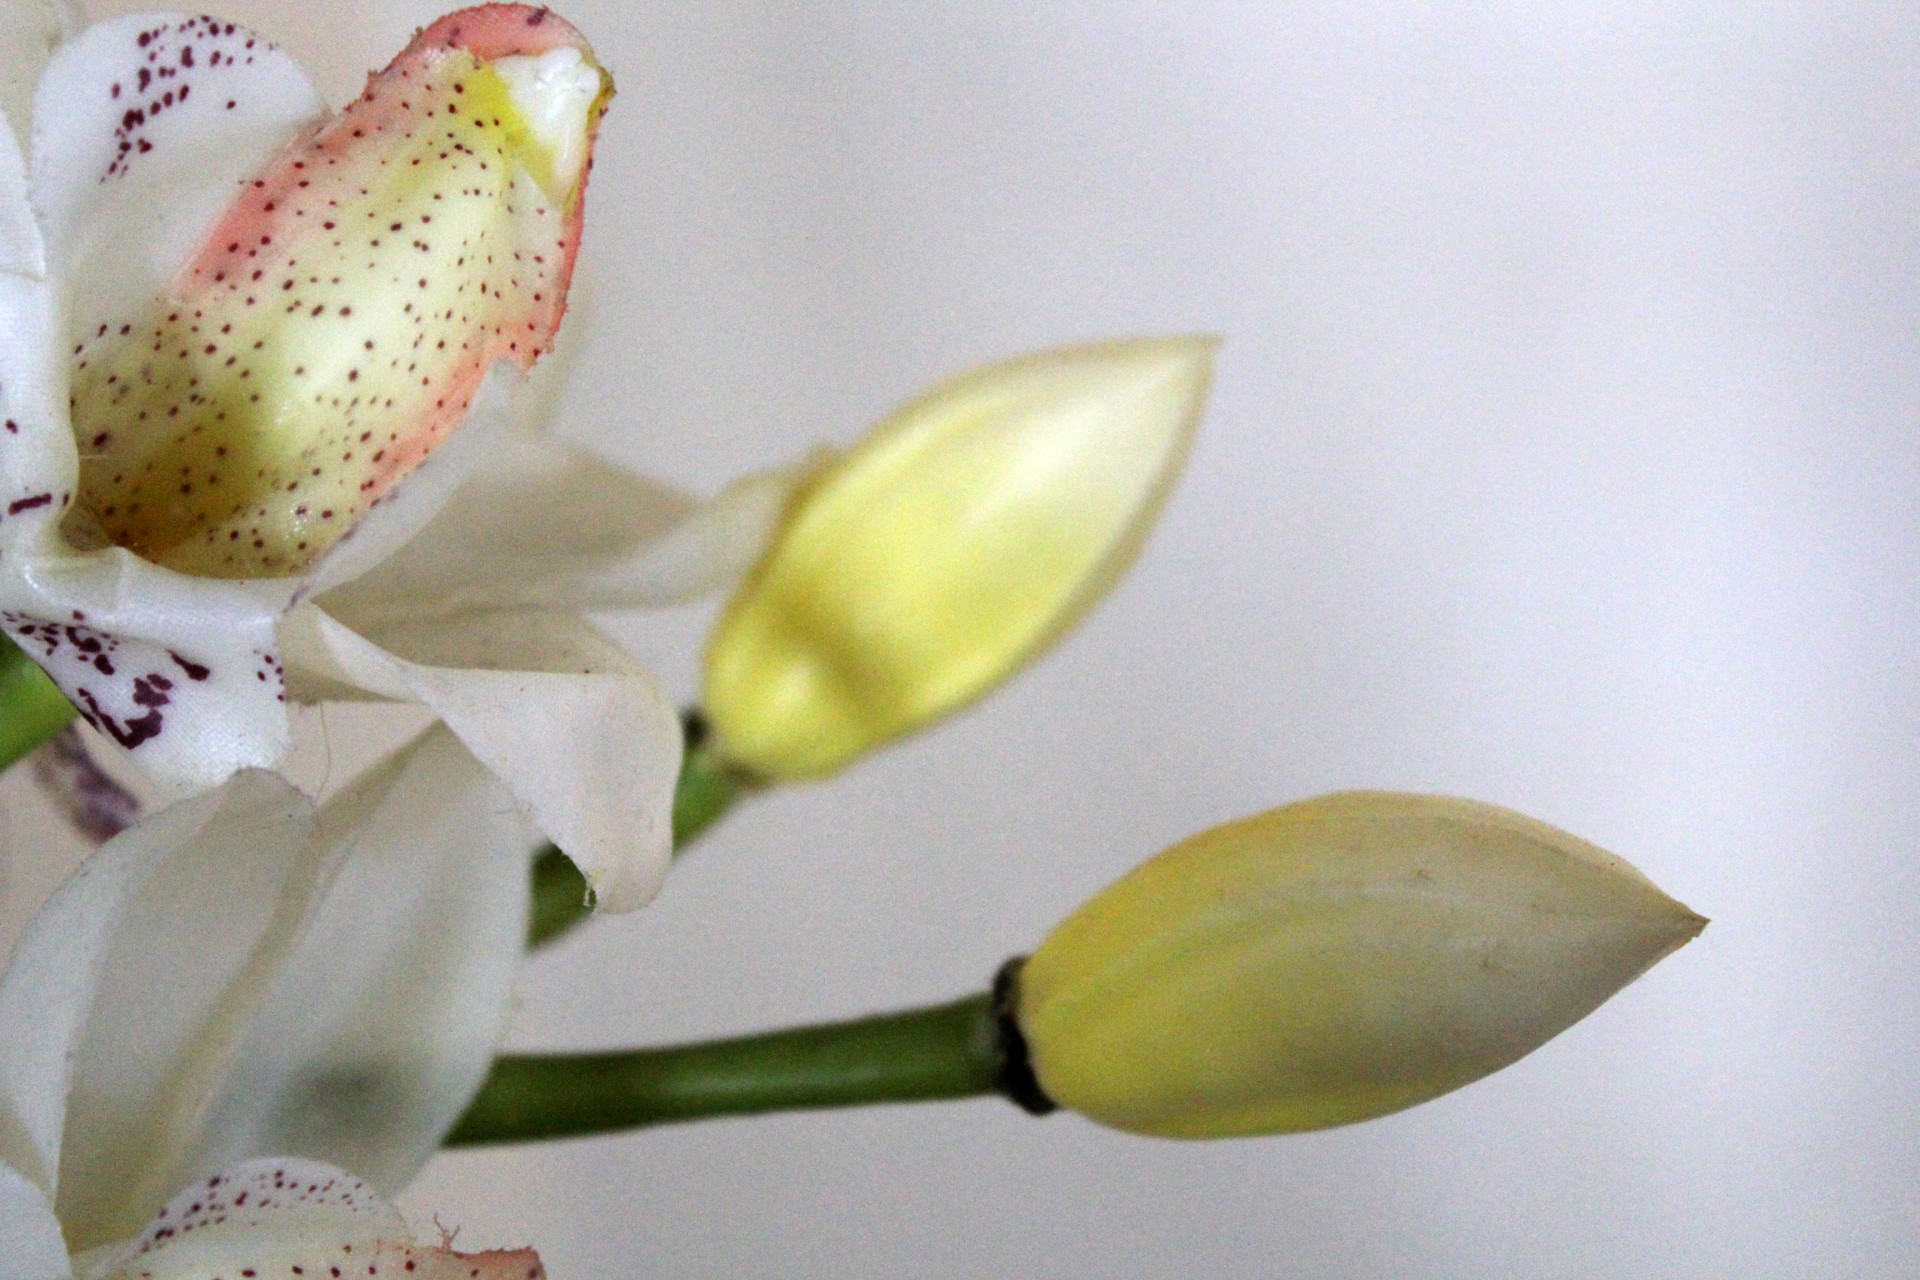 orchids flower white orchids free photo